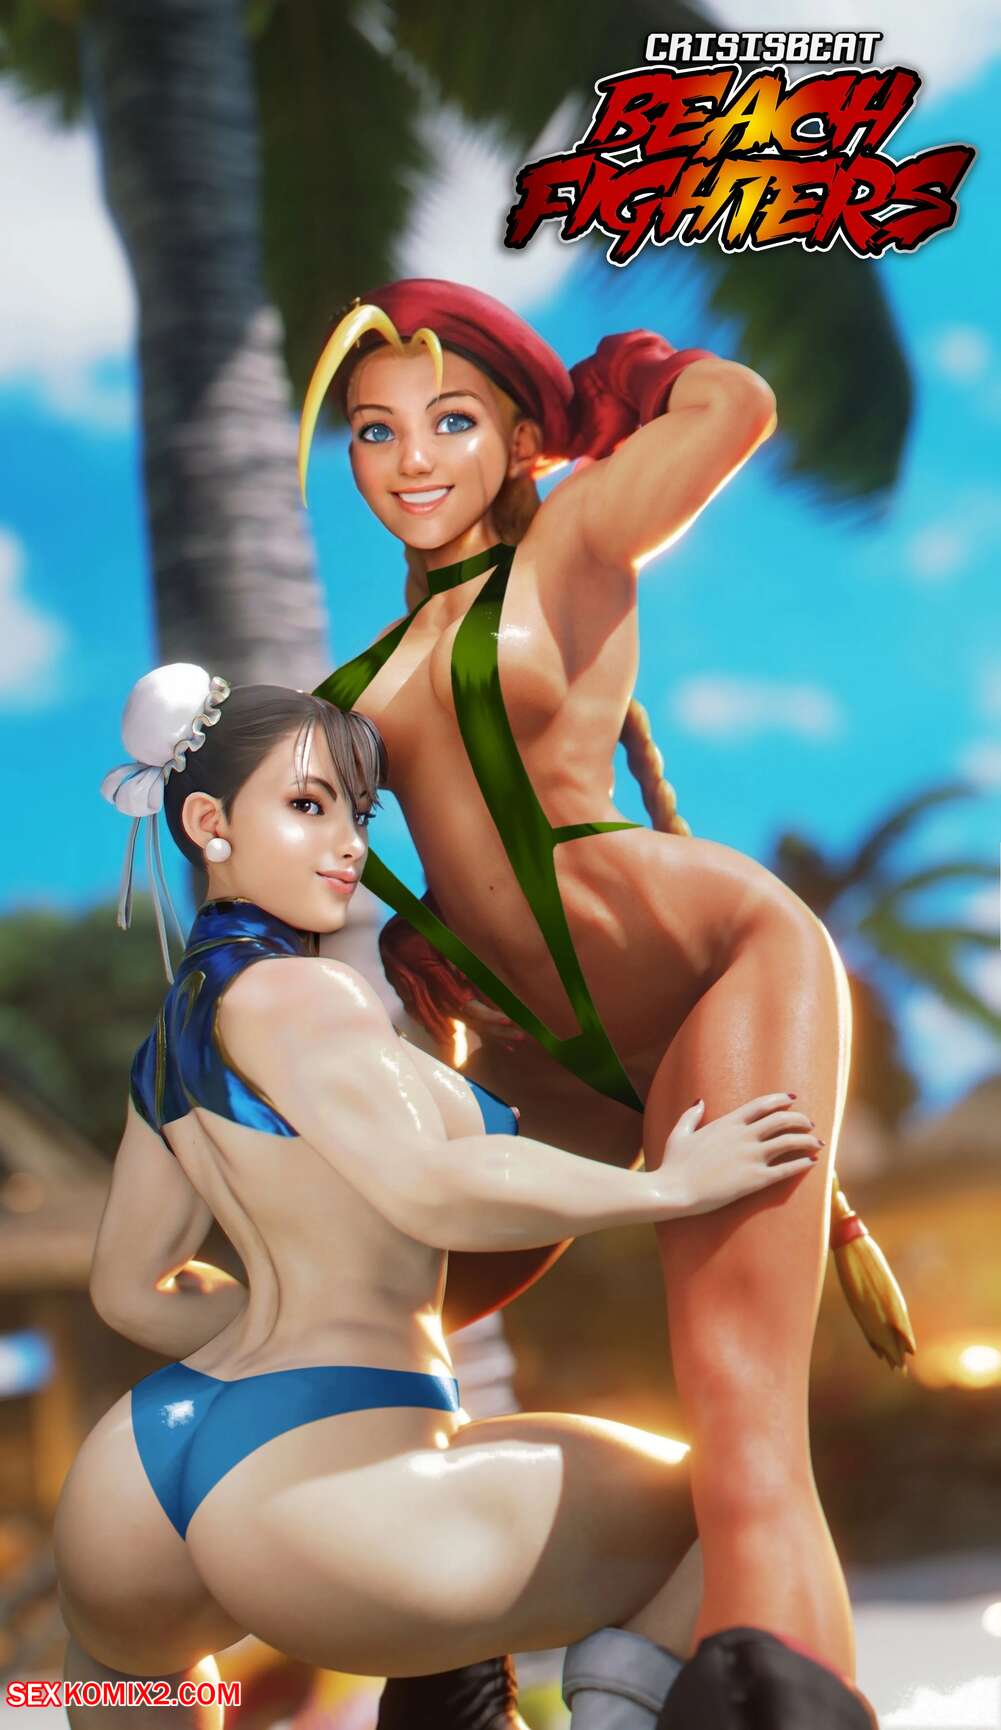 Street fighters porn